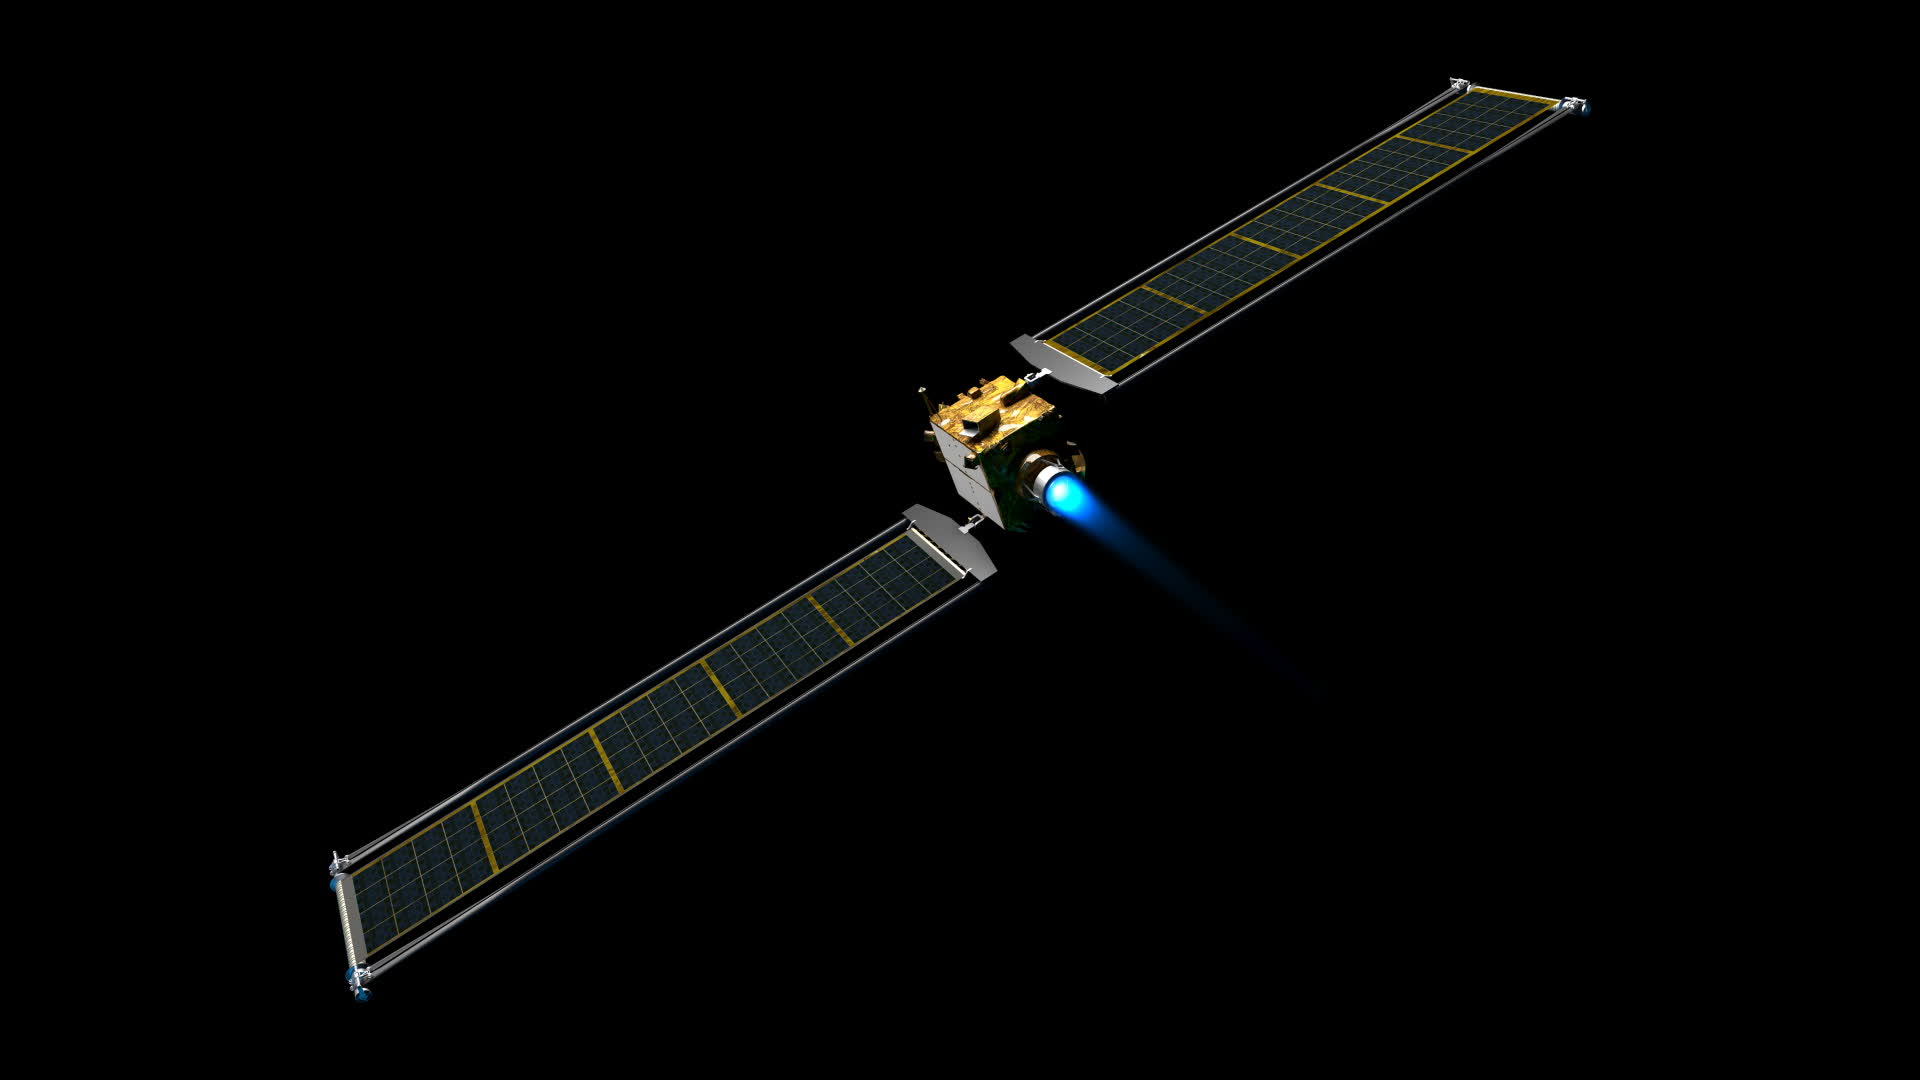 NASA will launch a spacecraft into an asteroid to knock it off course